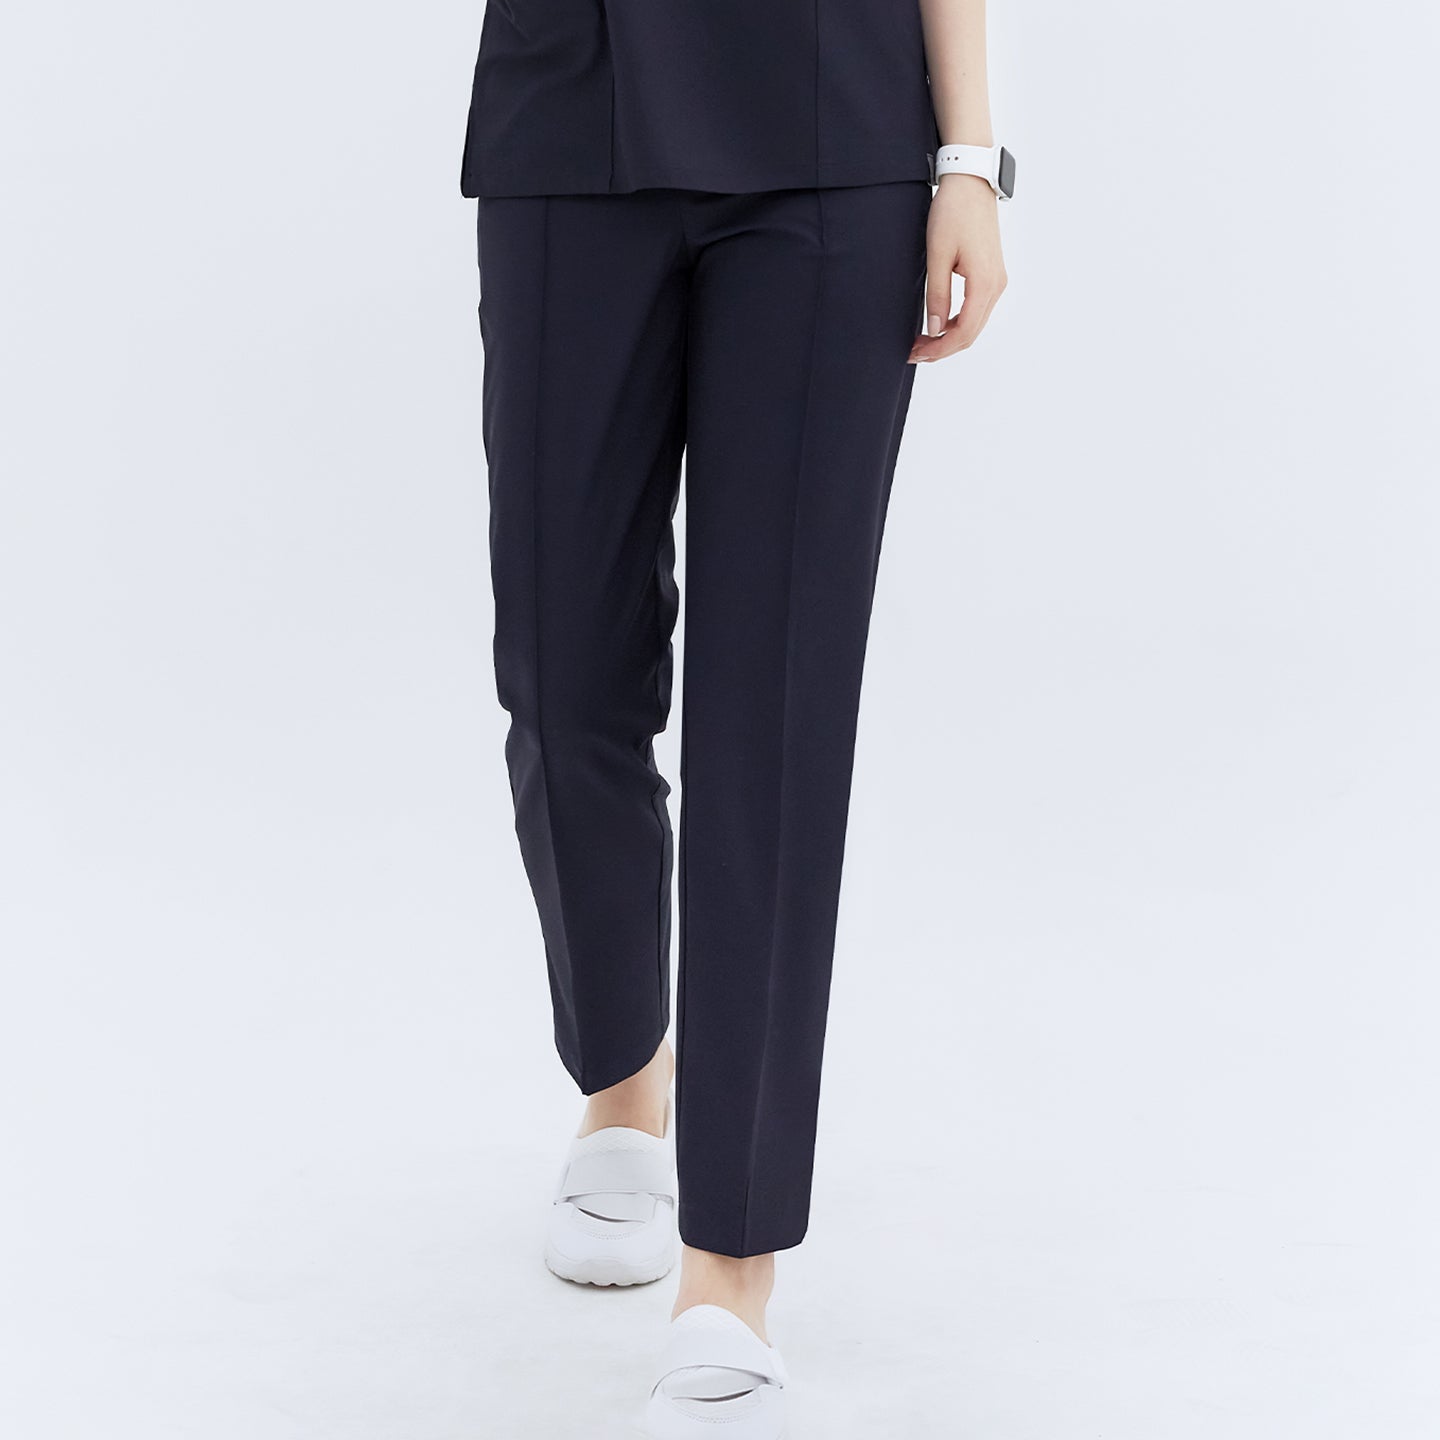 Close-up front view of a woman wearing Eco Navy Line Banding Scrub Pants, highlighting the sleek design and full length of the pants paired with white shoes,Eco Navy